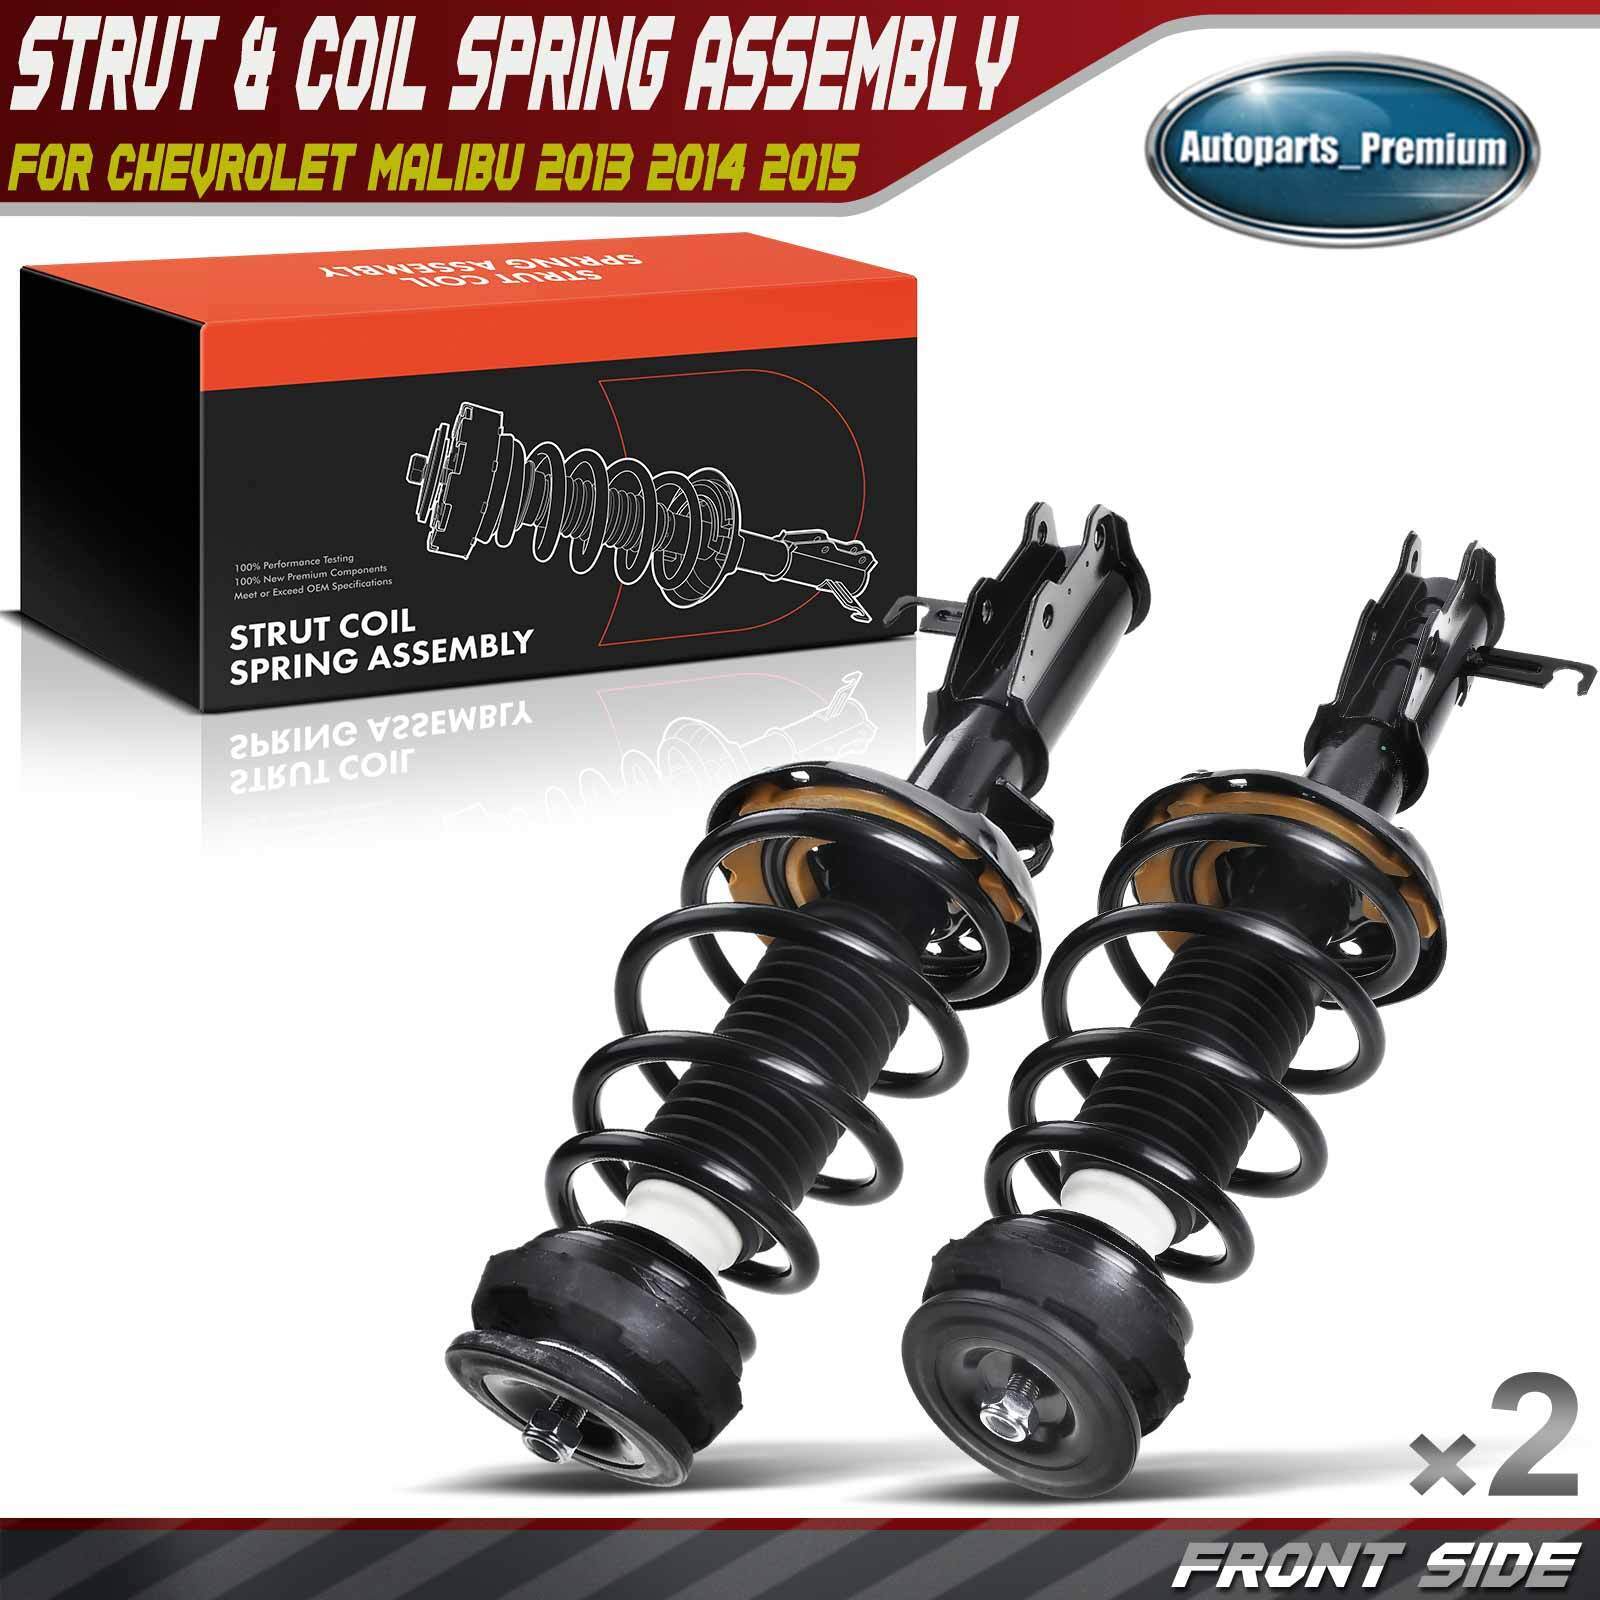 2x Front Complete Strut & Coil Spring Assembly for Chevrolet Malibu 2013-2015